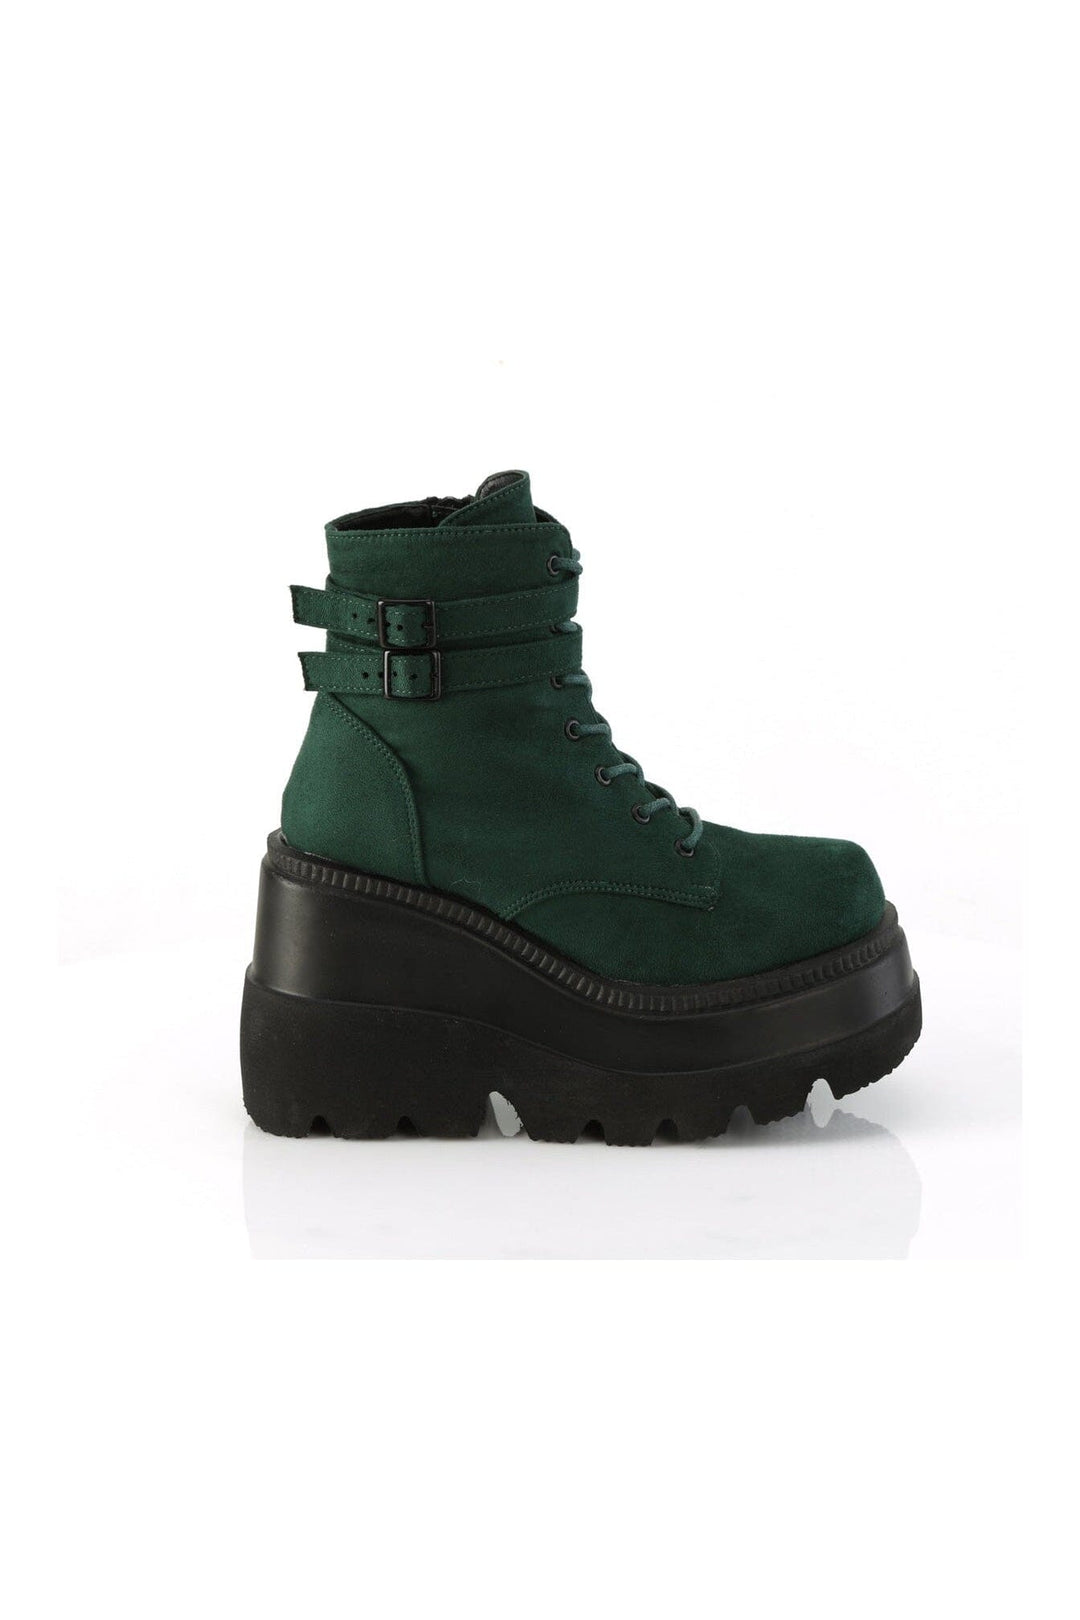 SHAKER-52 Green Vegan Suede Ankle Boot-Ankle Boots-Demonia-SEXYSHOES.COM